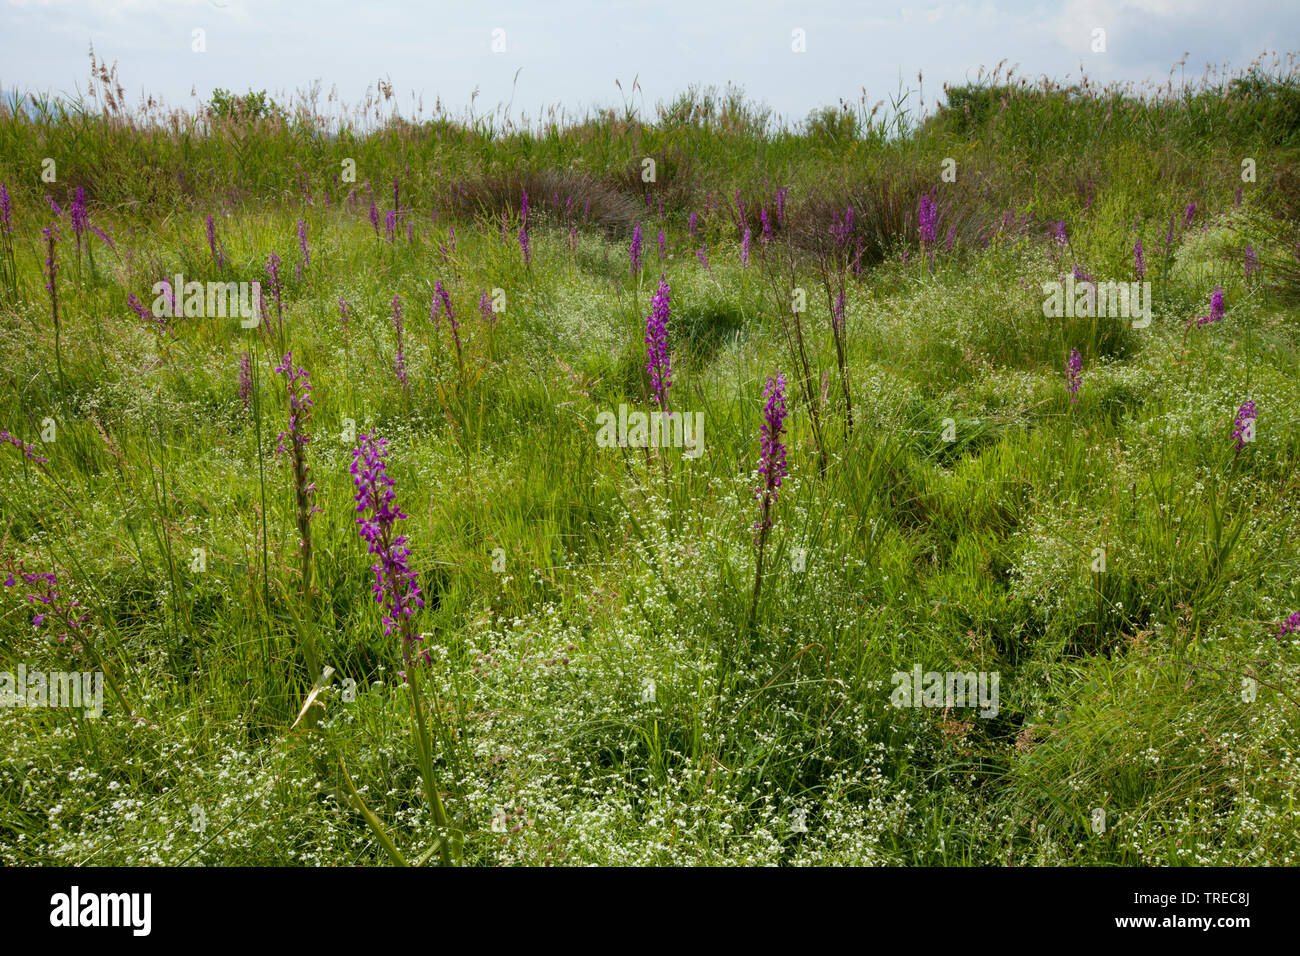 Bog orchid (Orchis palustris, Anacamptis palustris), several blooming Bog orchids in a marsh meadow, Greece, Lesbos Stock Photo